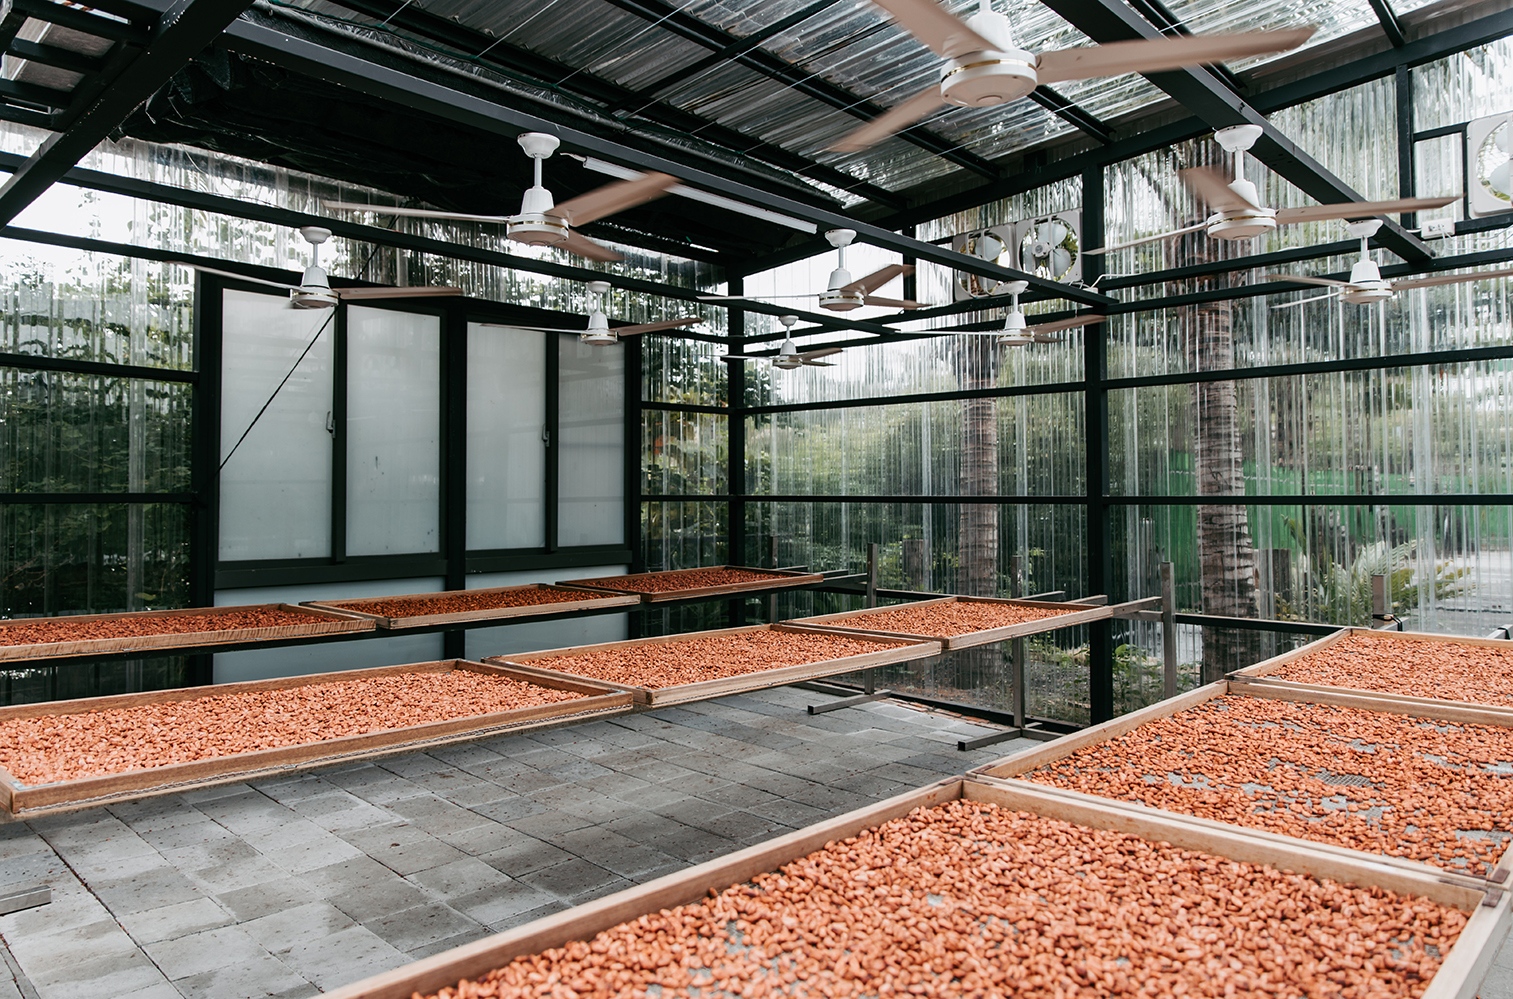 Drying cacao in Taiwan